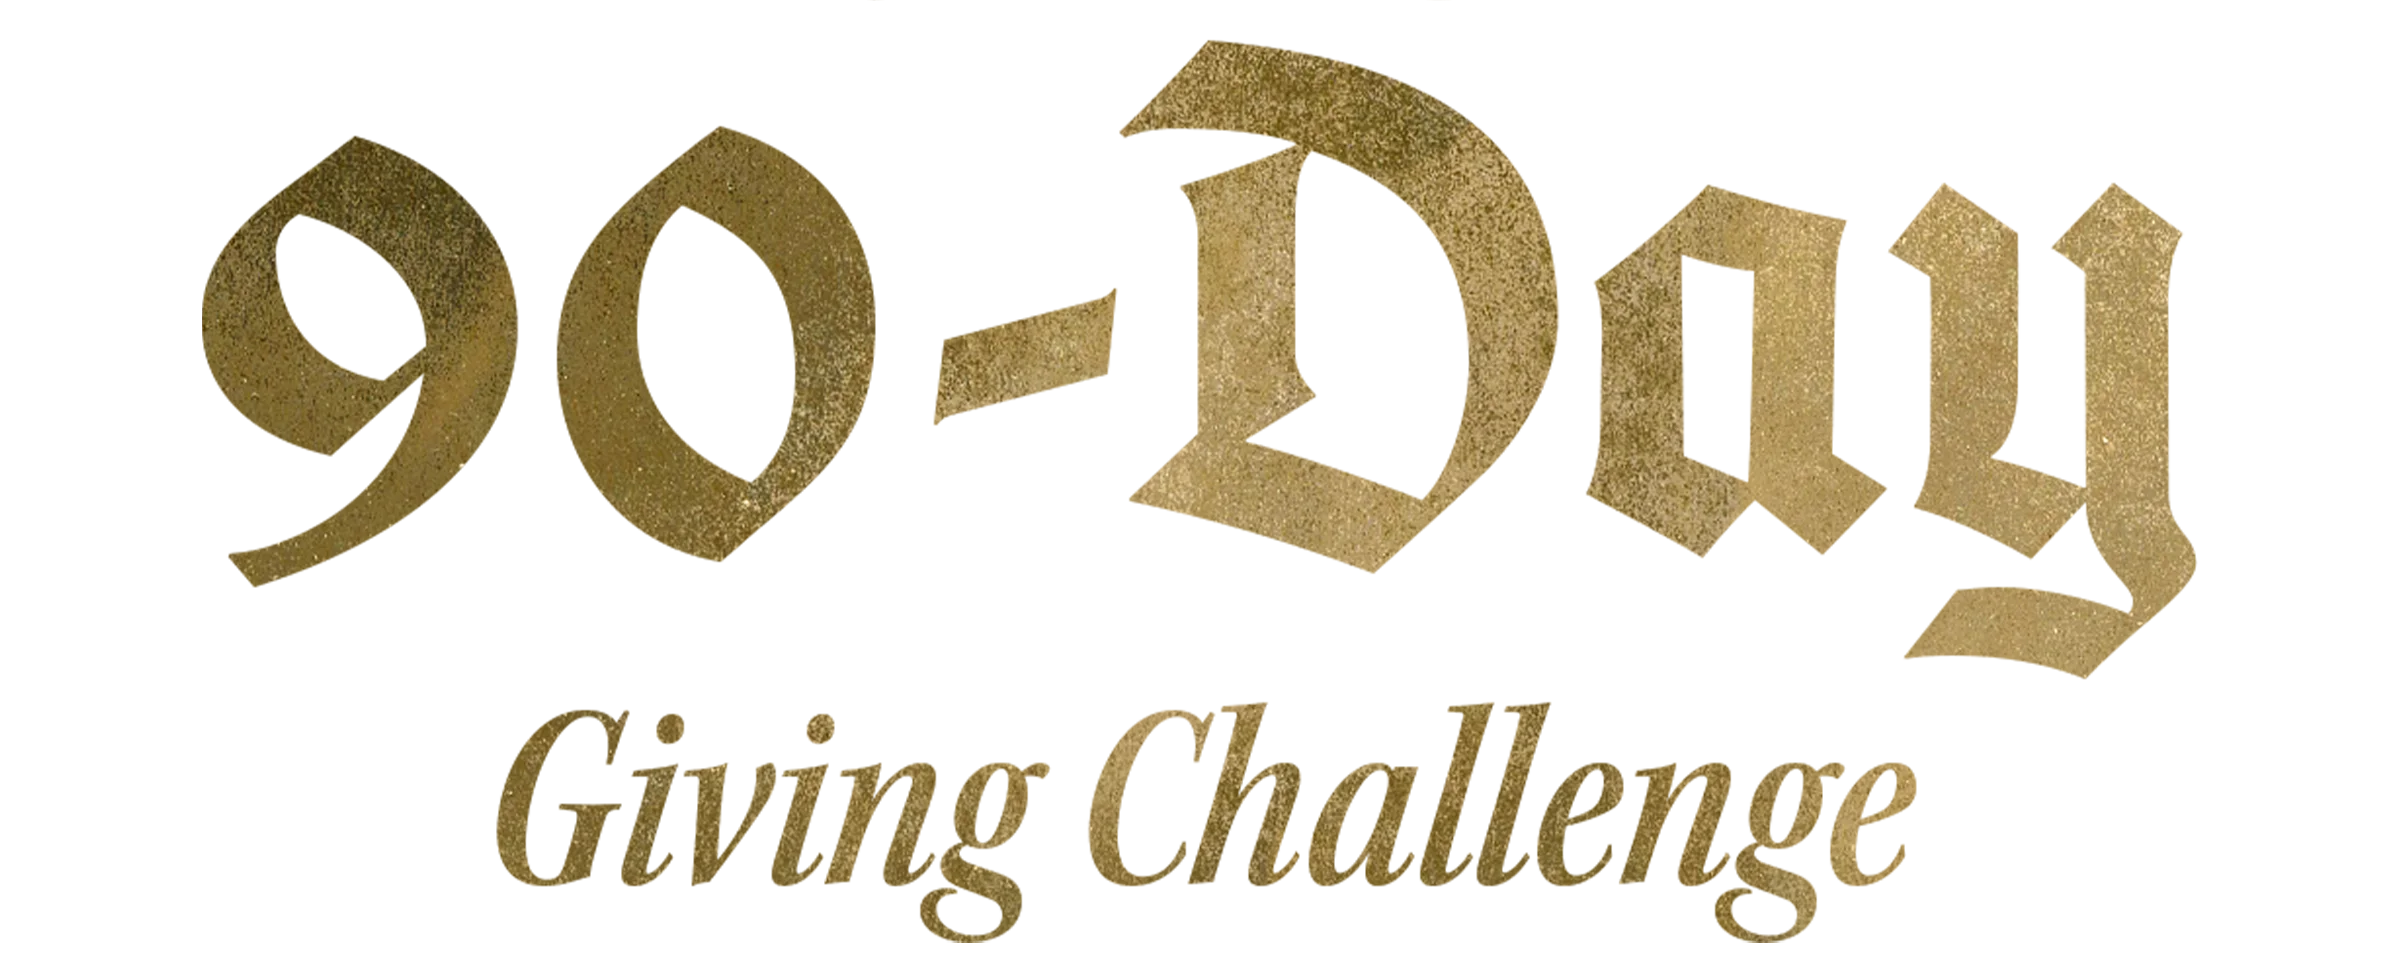 90-Day Giving Challenge